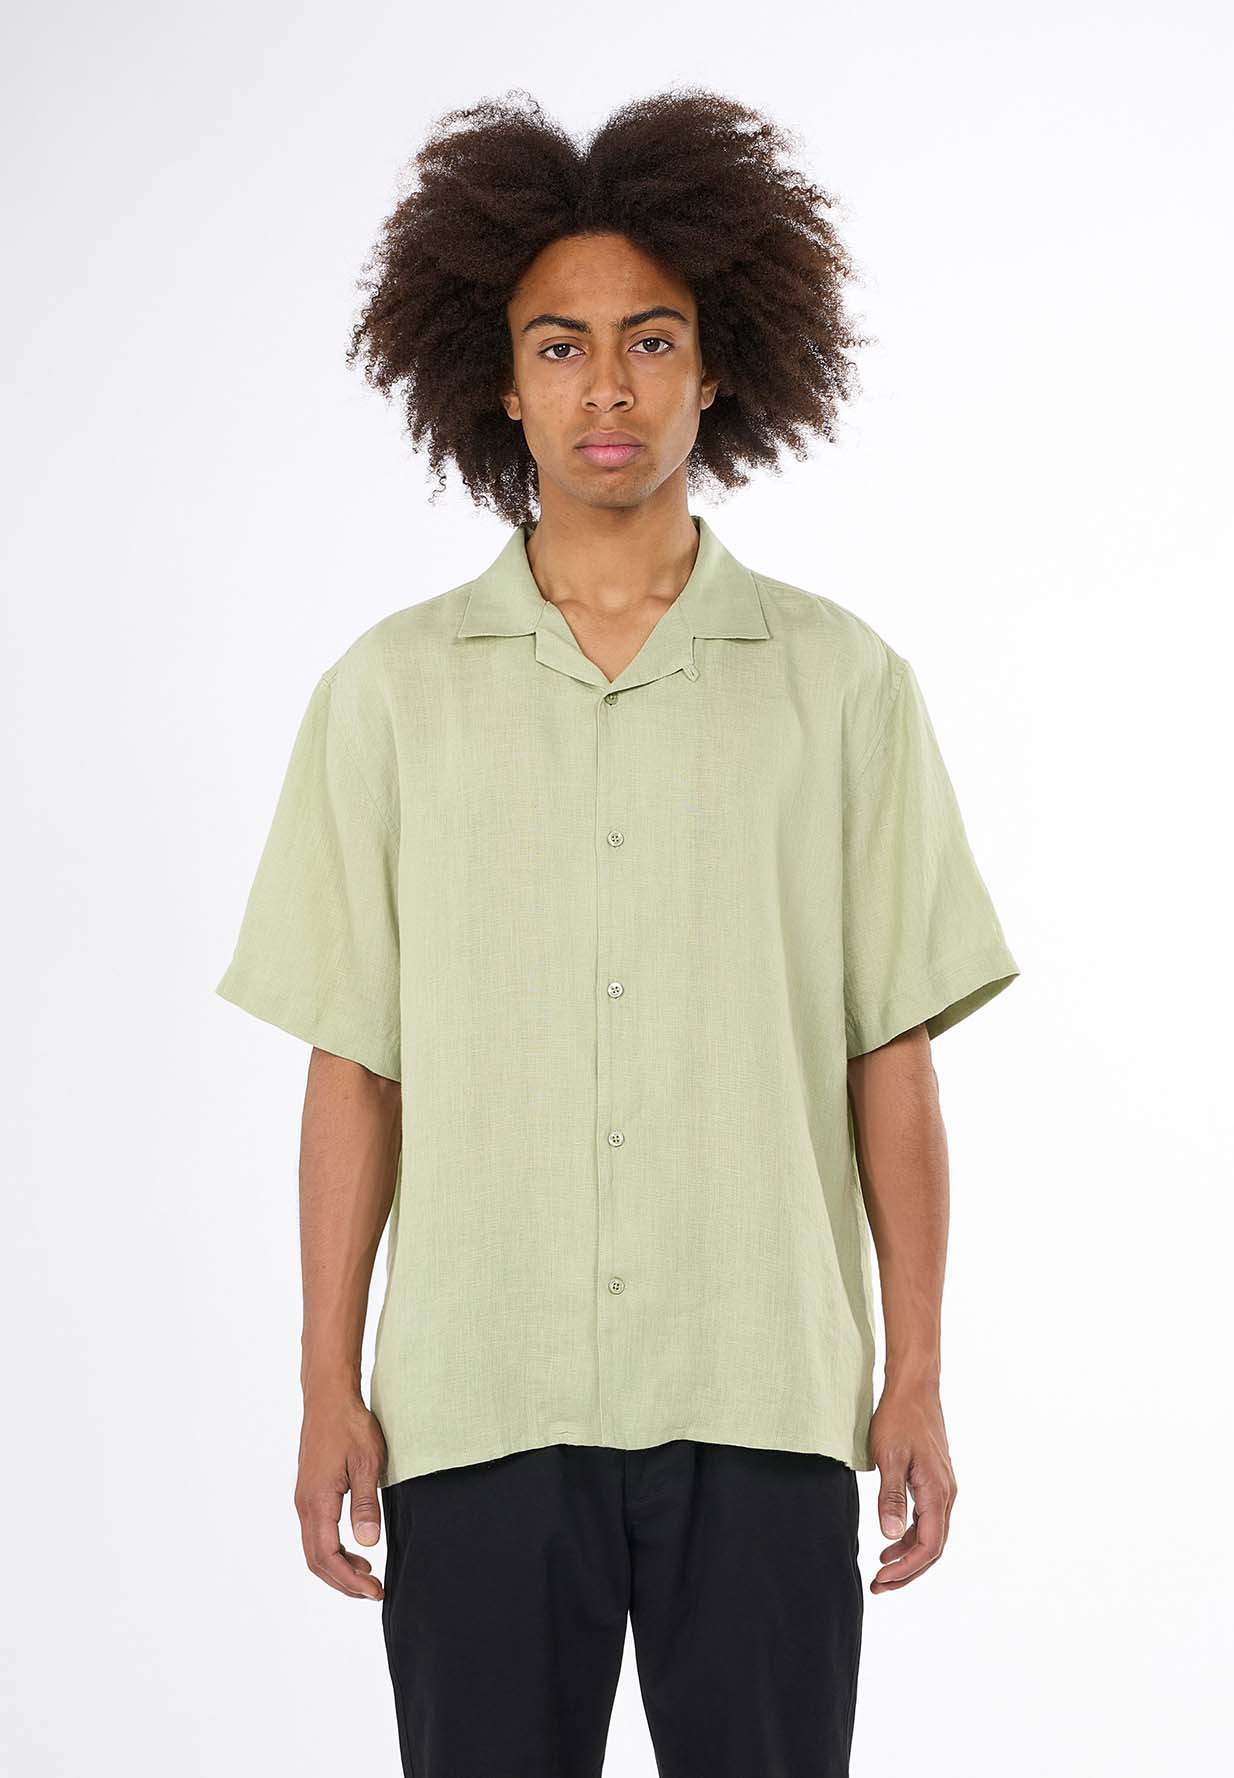 KNOWLEDGECOTTON APPAREL Box Fit Short Sleeved Linen Shirt burned olive S